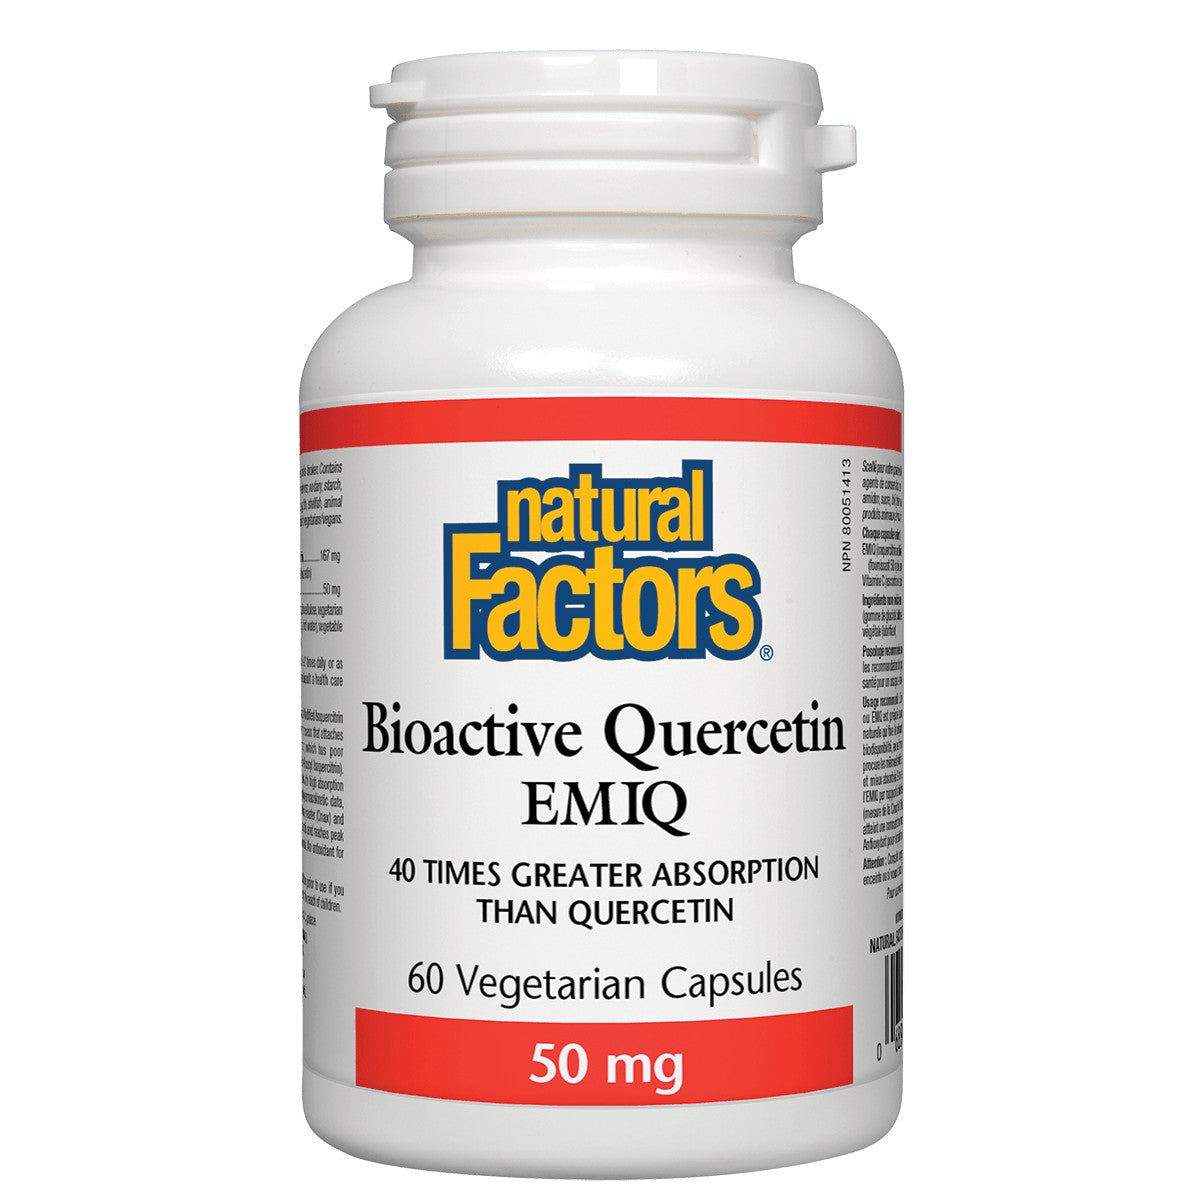 Natural Factors Bioactive Quercetin EMIQ, All Year Support For Healthy Inflammatory Responses And Sinuses, 60 Capsules